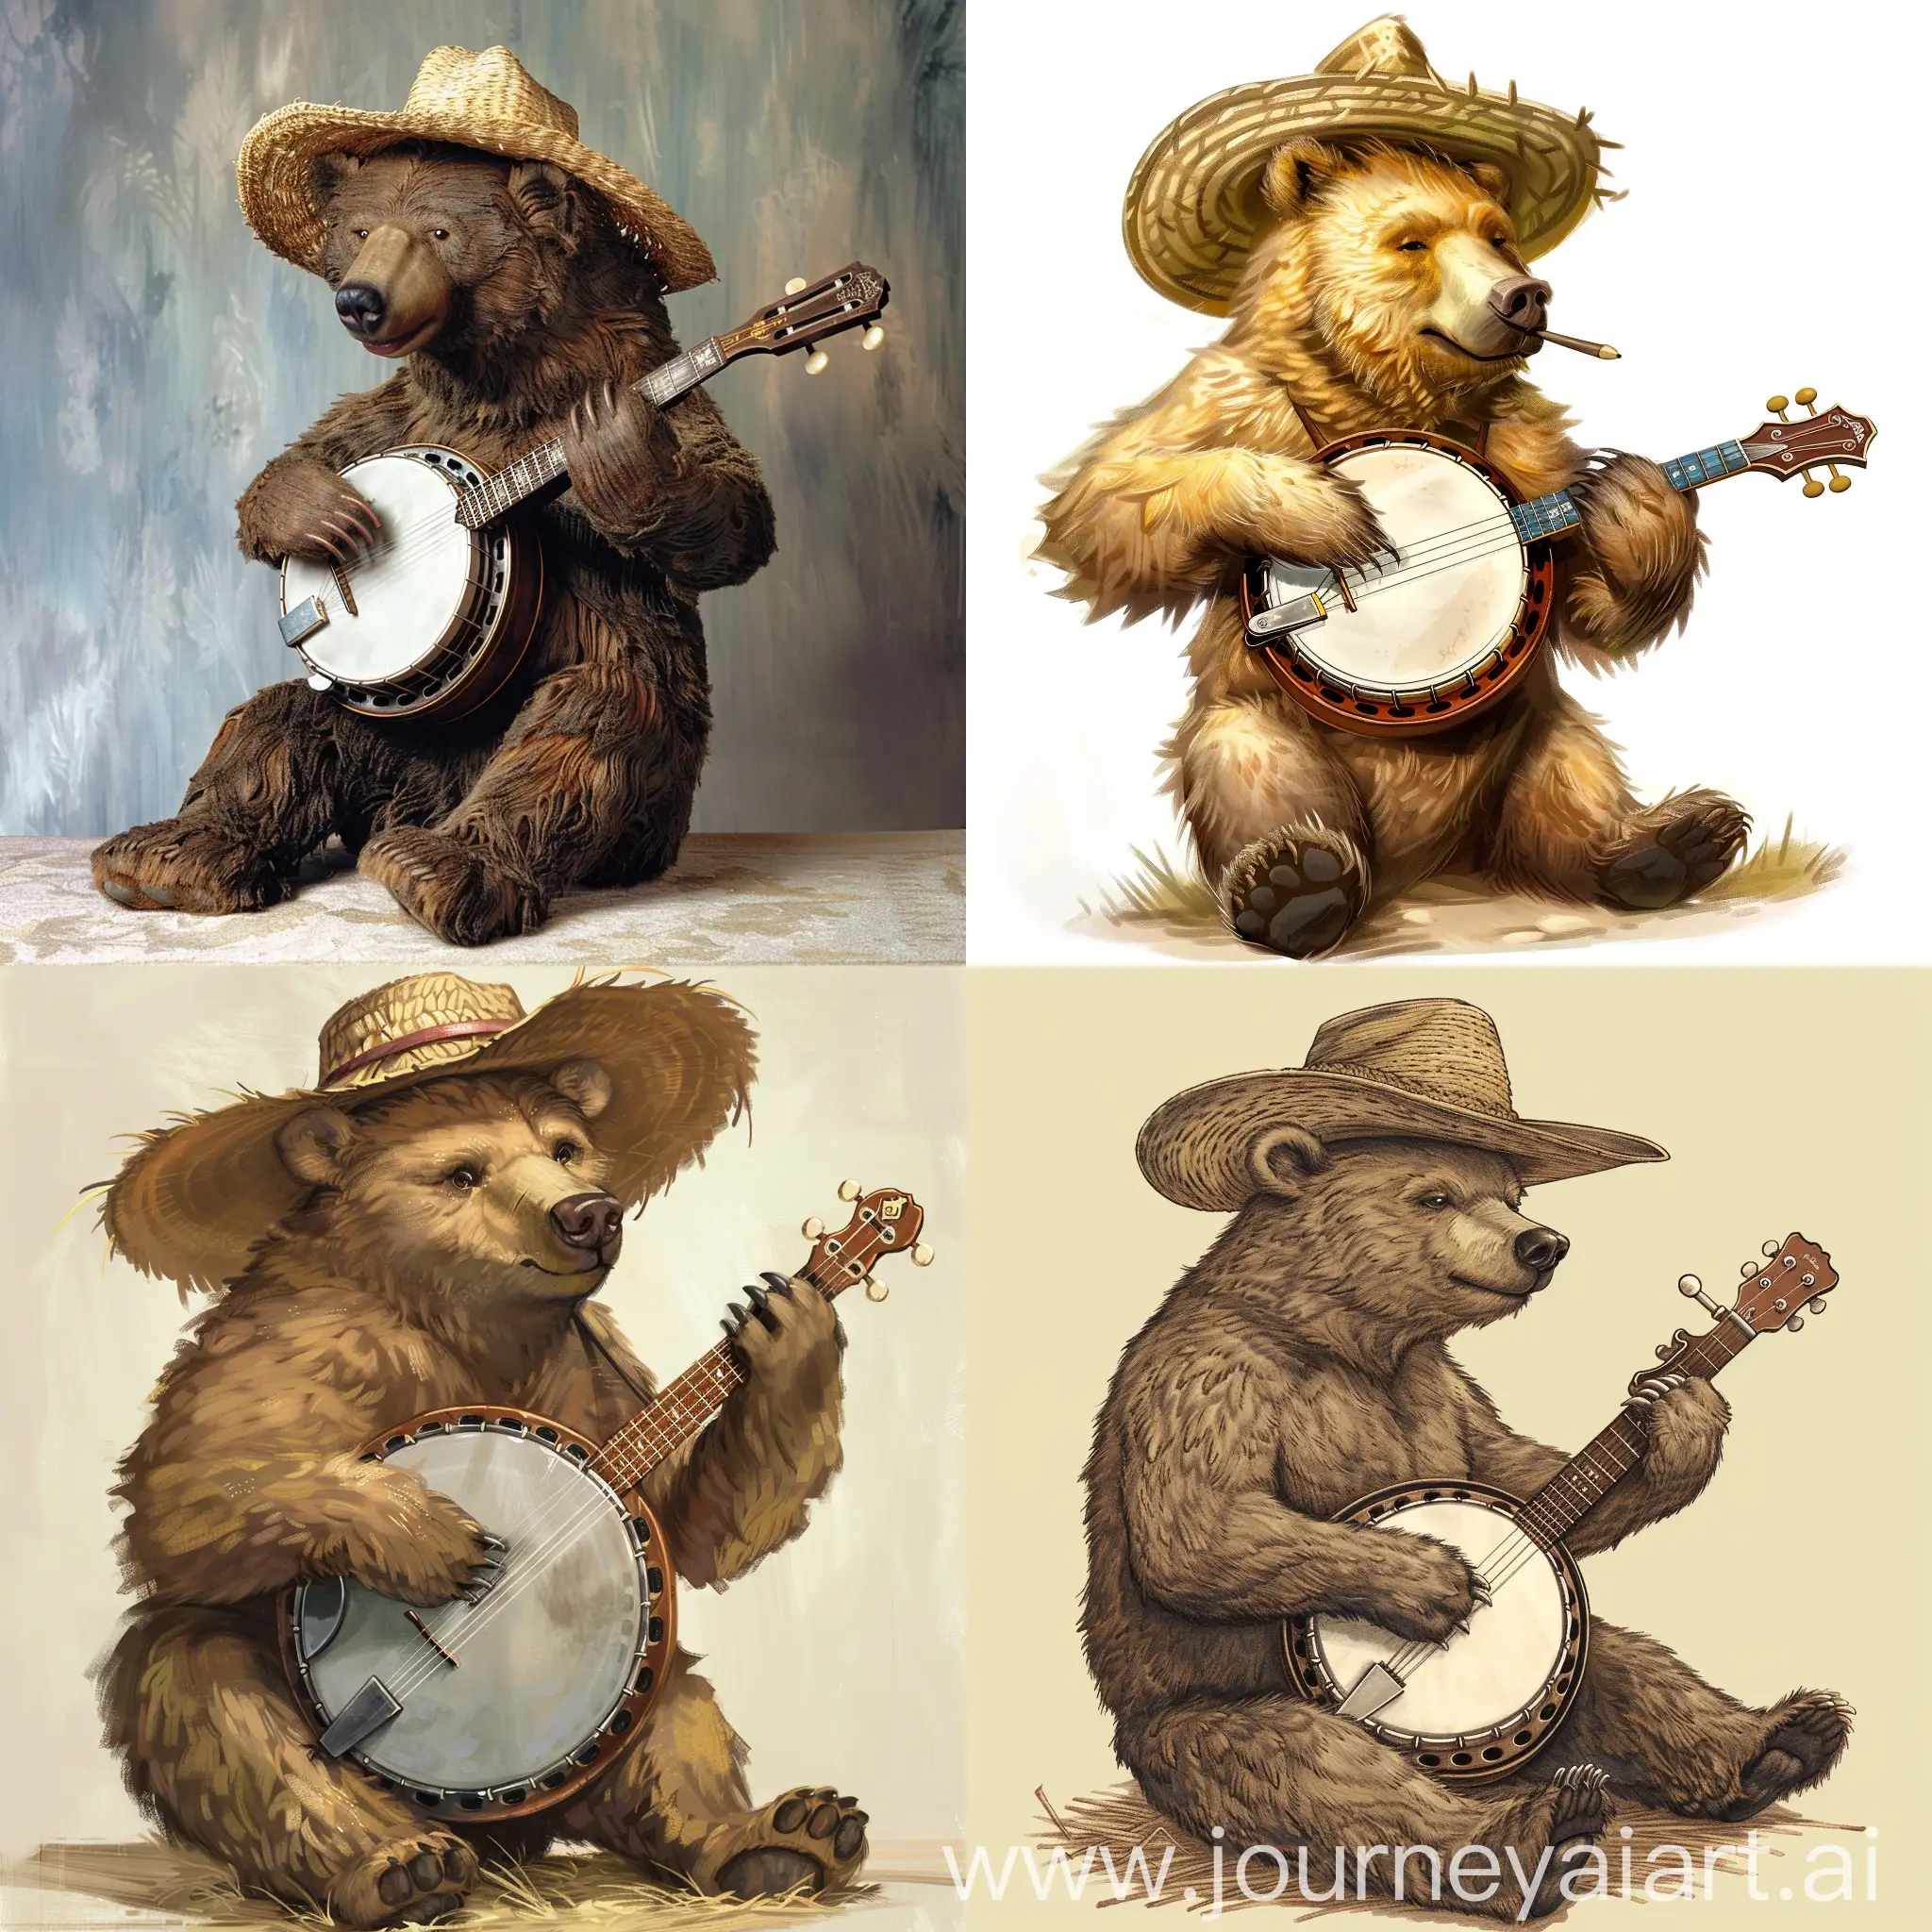 a country bear, playing a banjo, wearing a straw hat